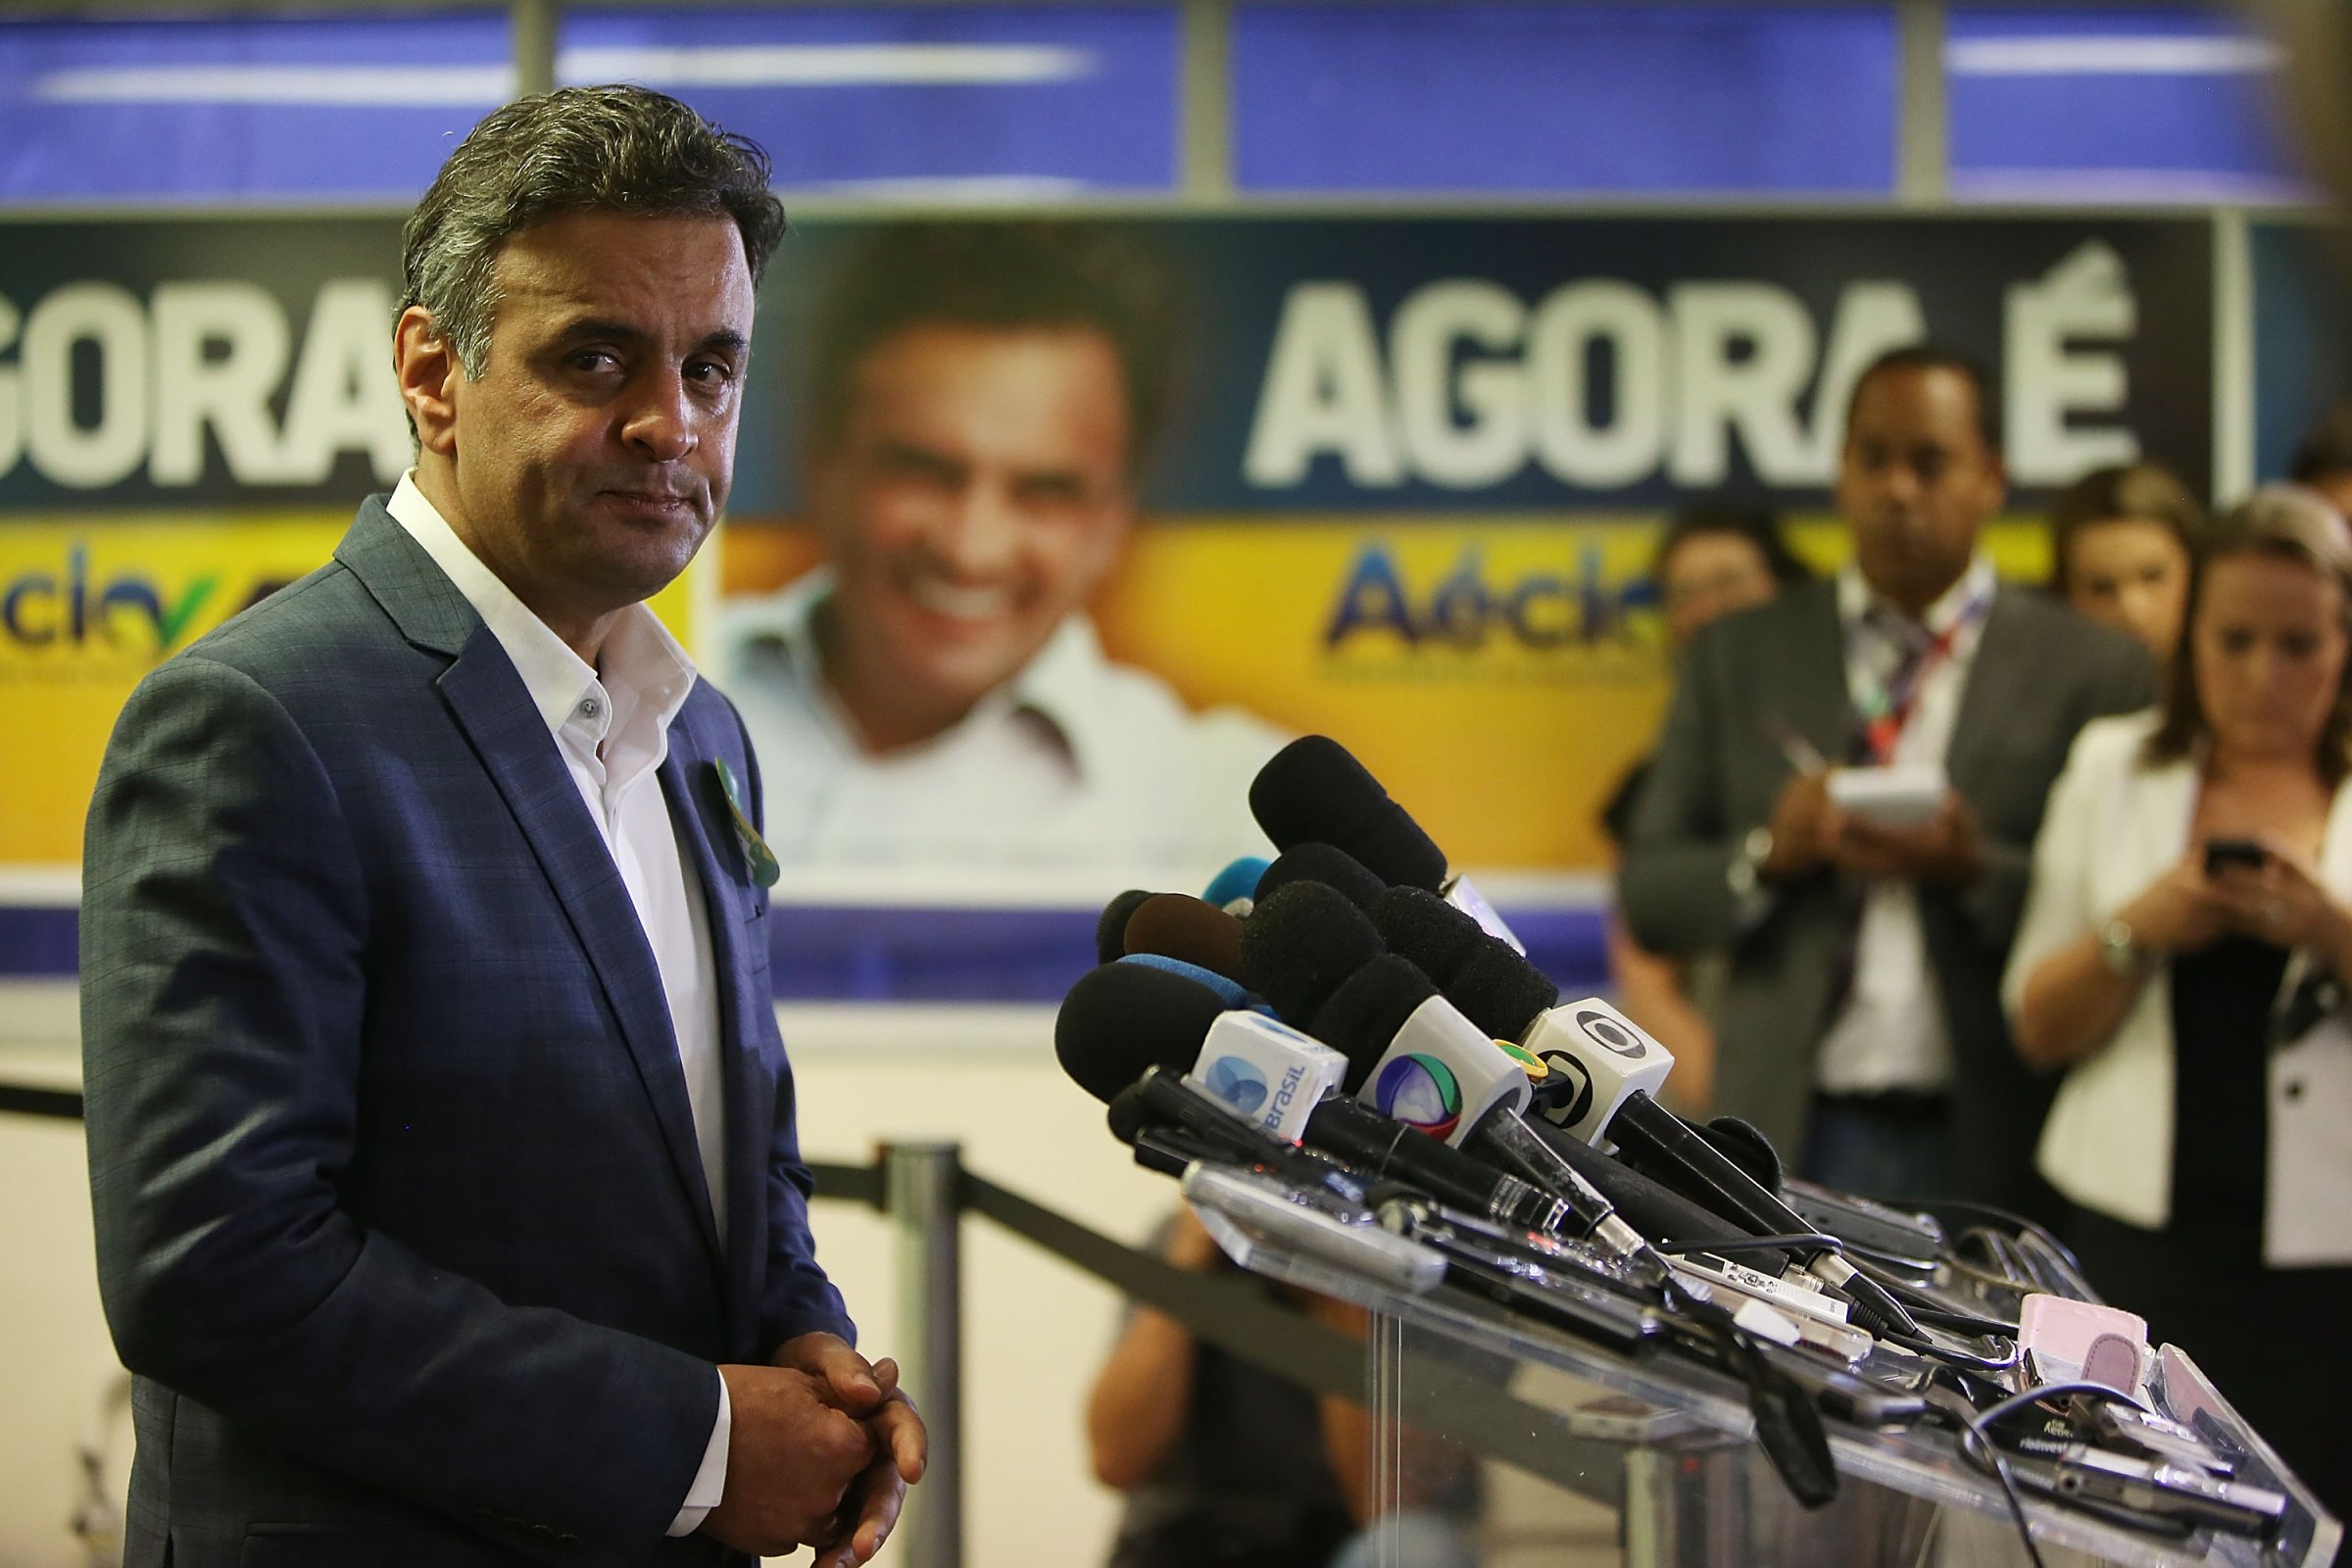 Presidential Candidate Aecio Neves Holds Press Conference